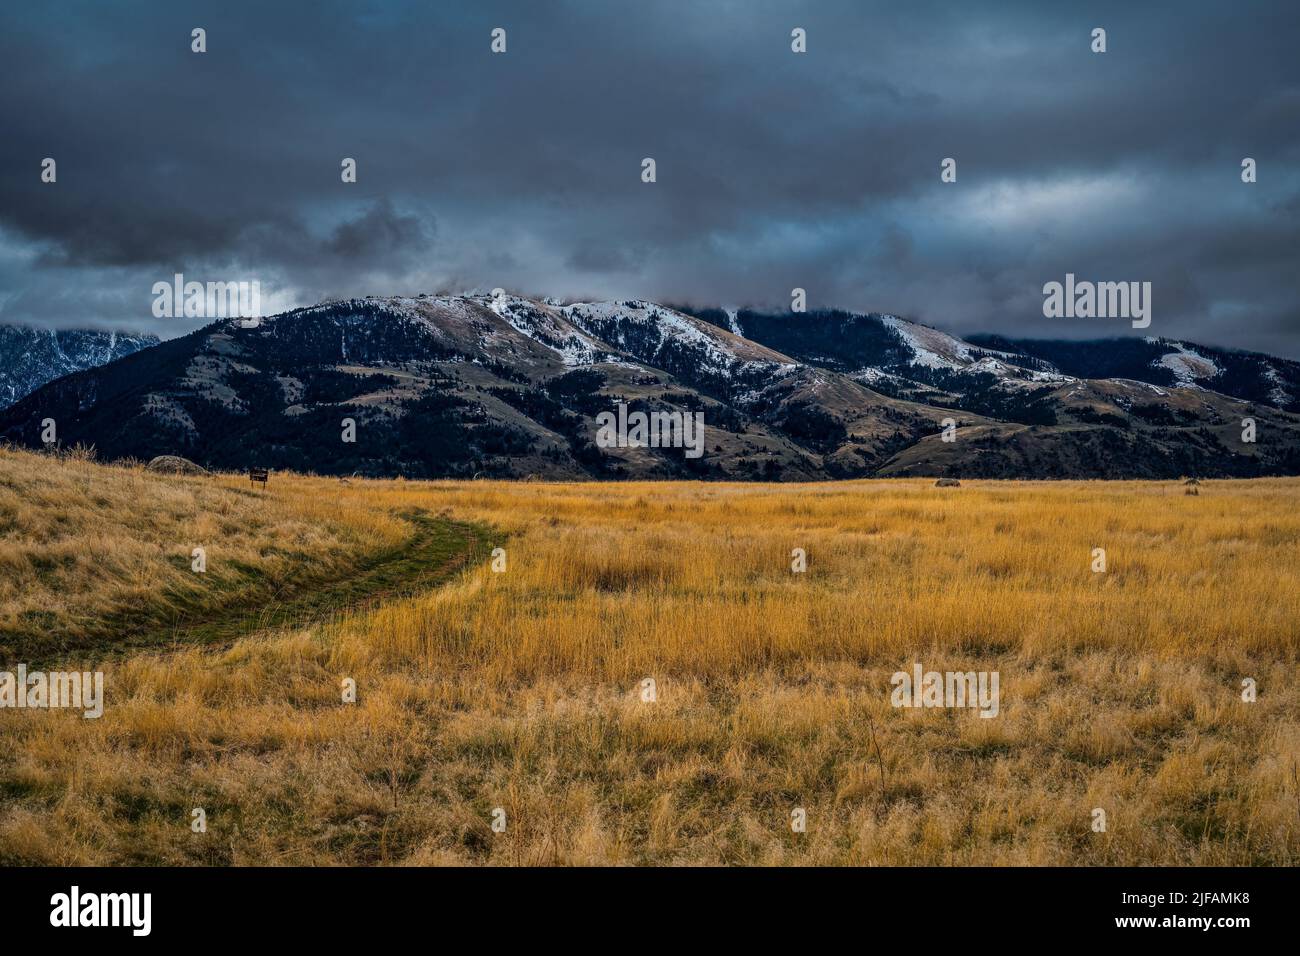 LIGHT COLORED GRASS FIELDS WITH A SNOW COVERED MOUNTAIN RANGE AND A CLOUDY SKY IN PRAY MONTANA Stock Photo